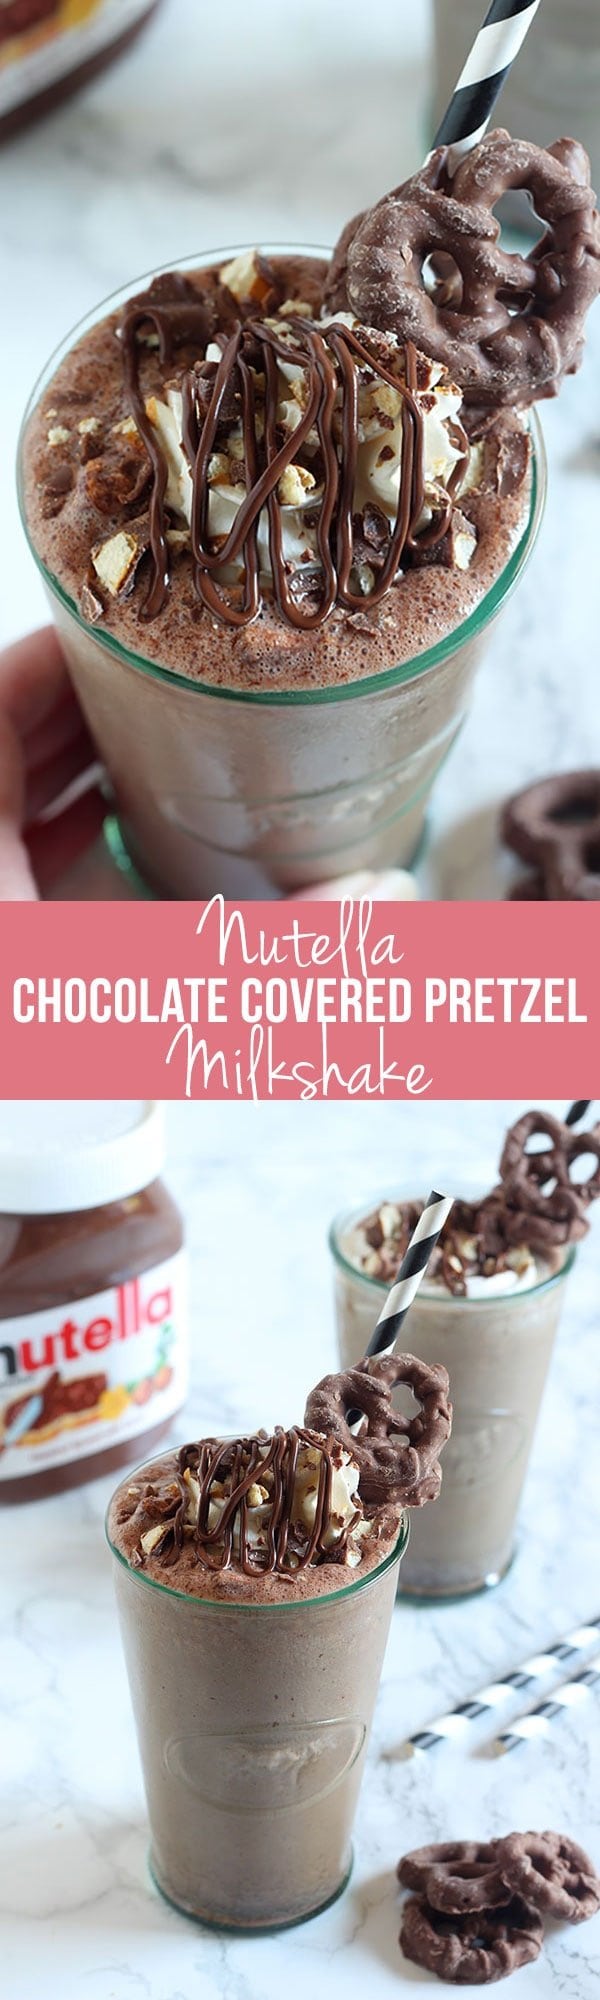 Holy WOW! Nutella Chocolate Covered Pretzel Milkshake features a chocolate Nutella milkshake with bits of chocolate covered pretzels, topped with whipped cream, more Nutella, and more pretzels! Complete decadence in a drink.